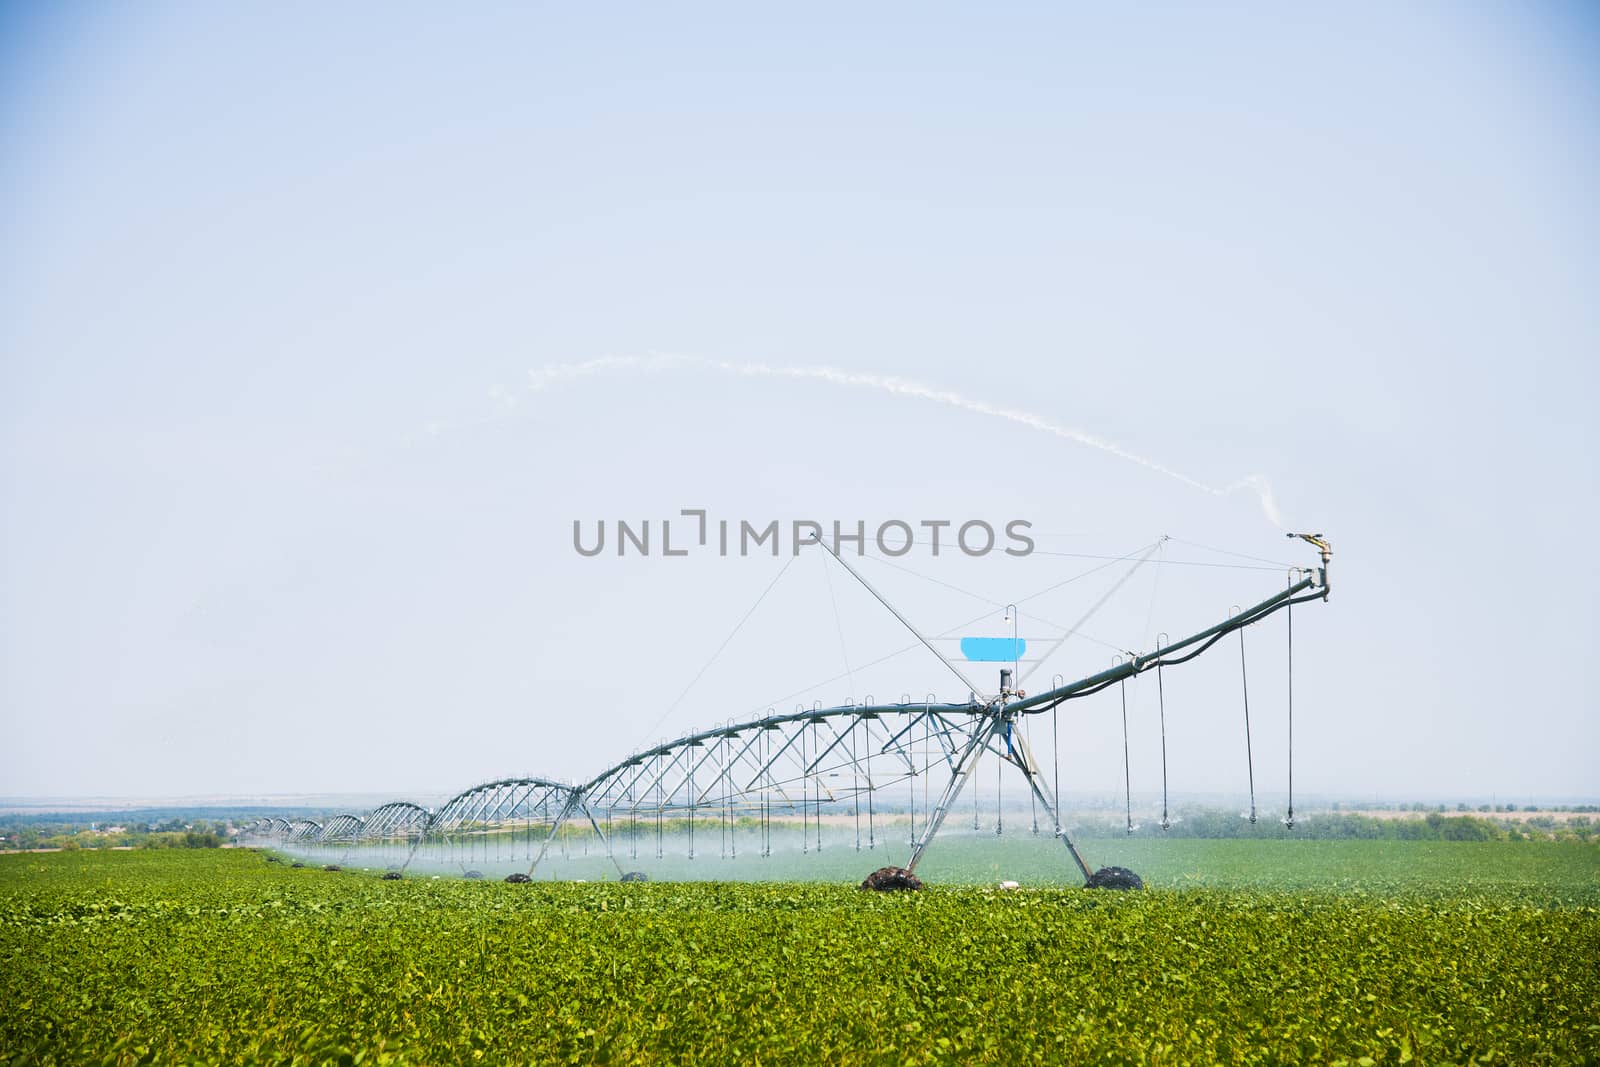 Automated farming irrigation sprinklers system on cultivated agricultural landscape field